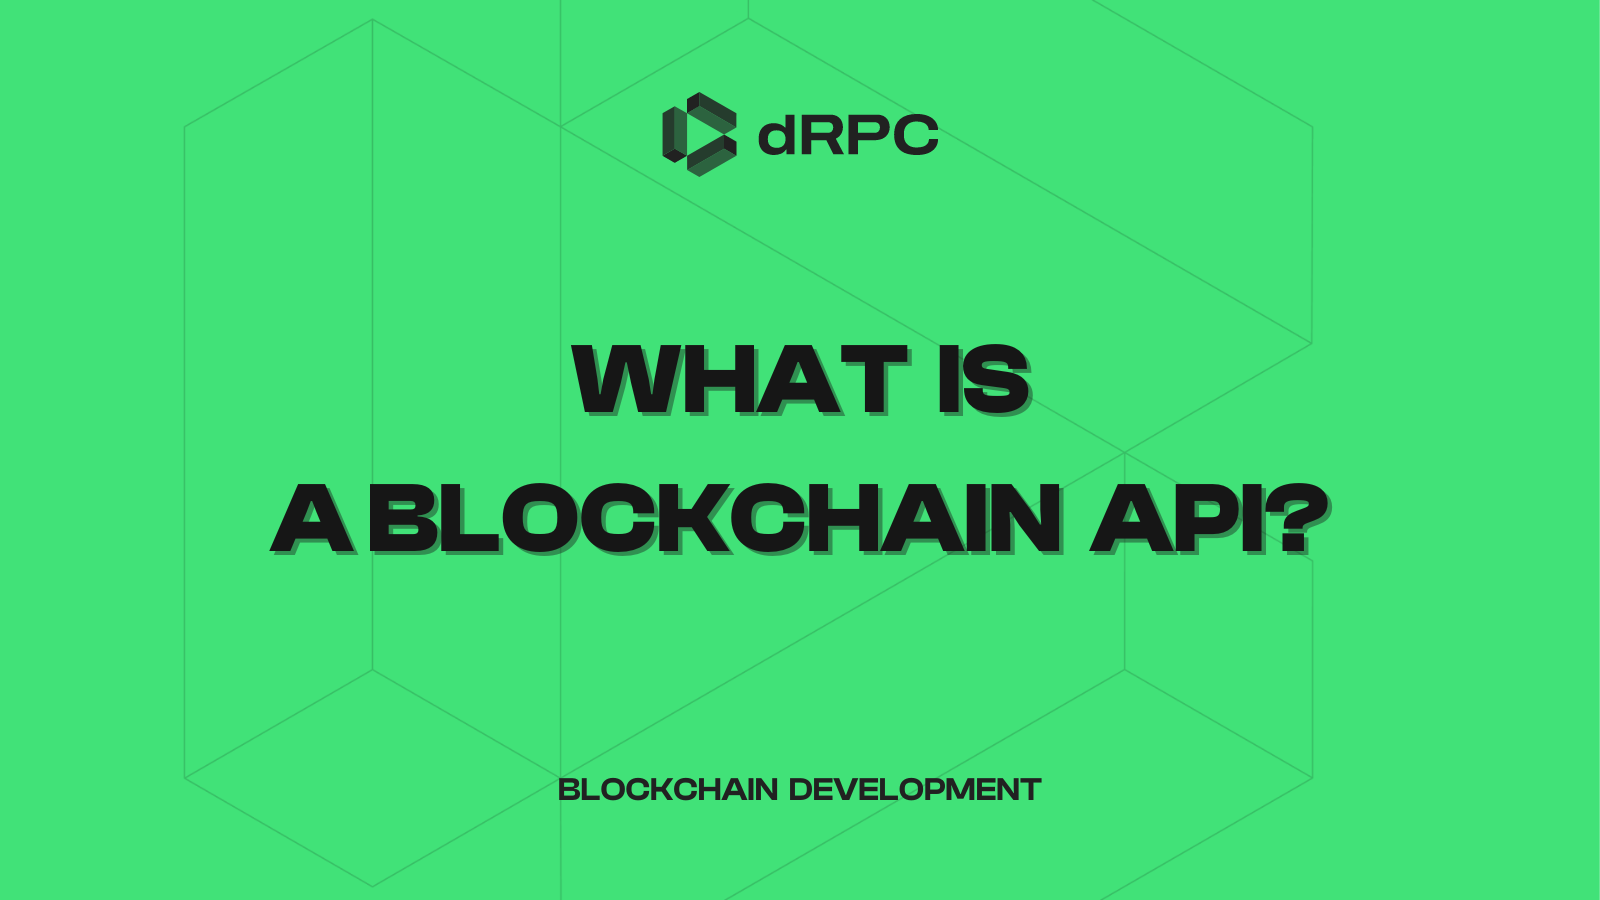 What is a Blockchain API?